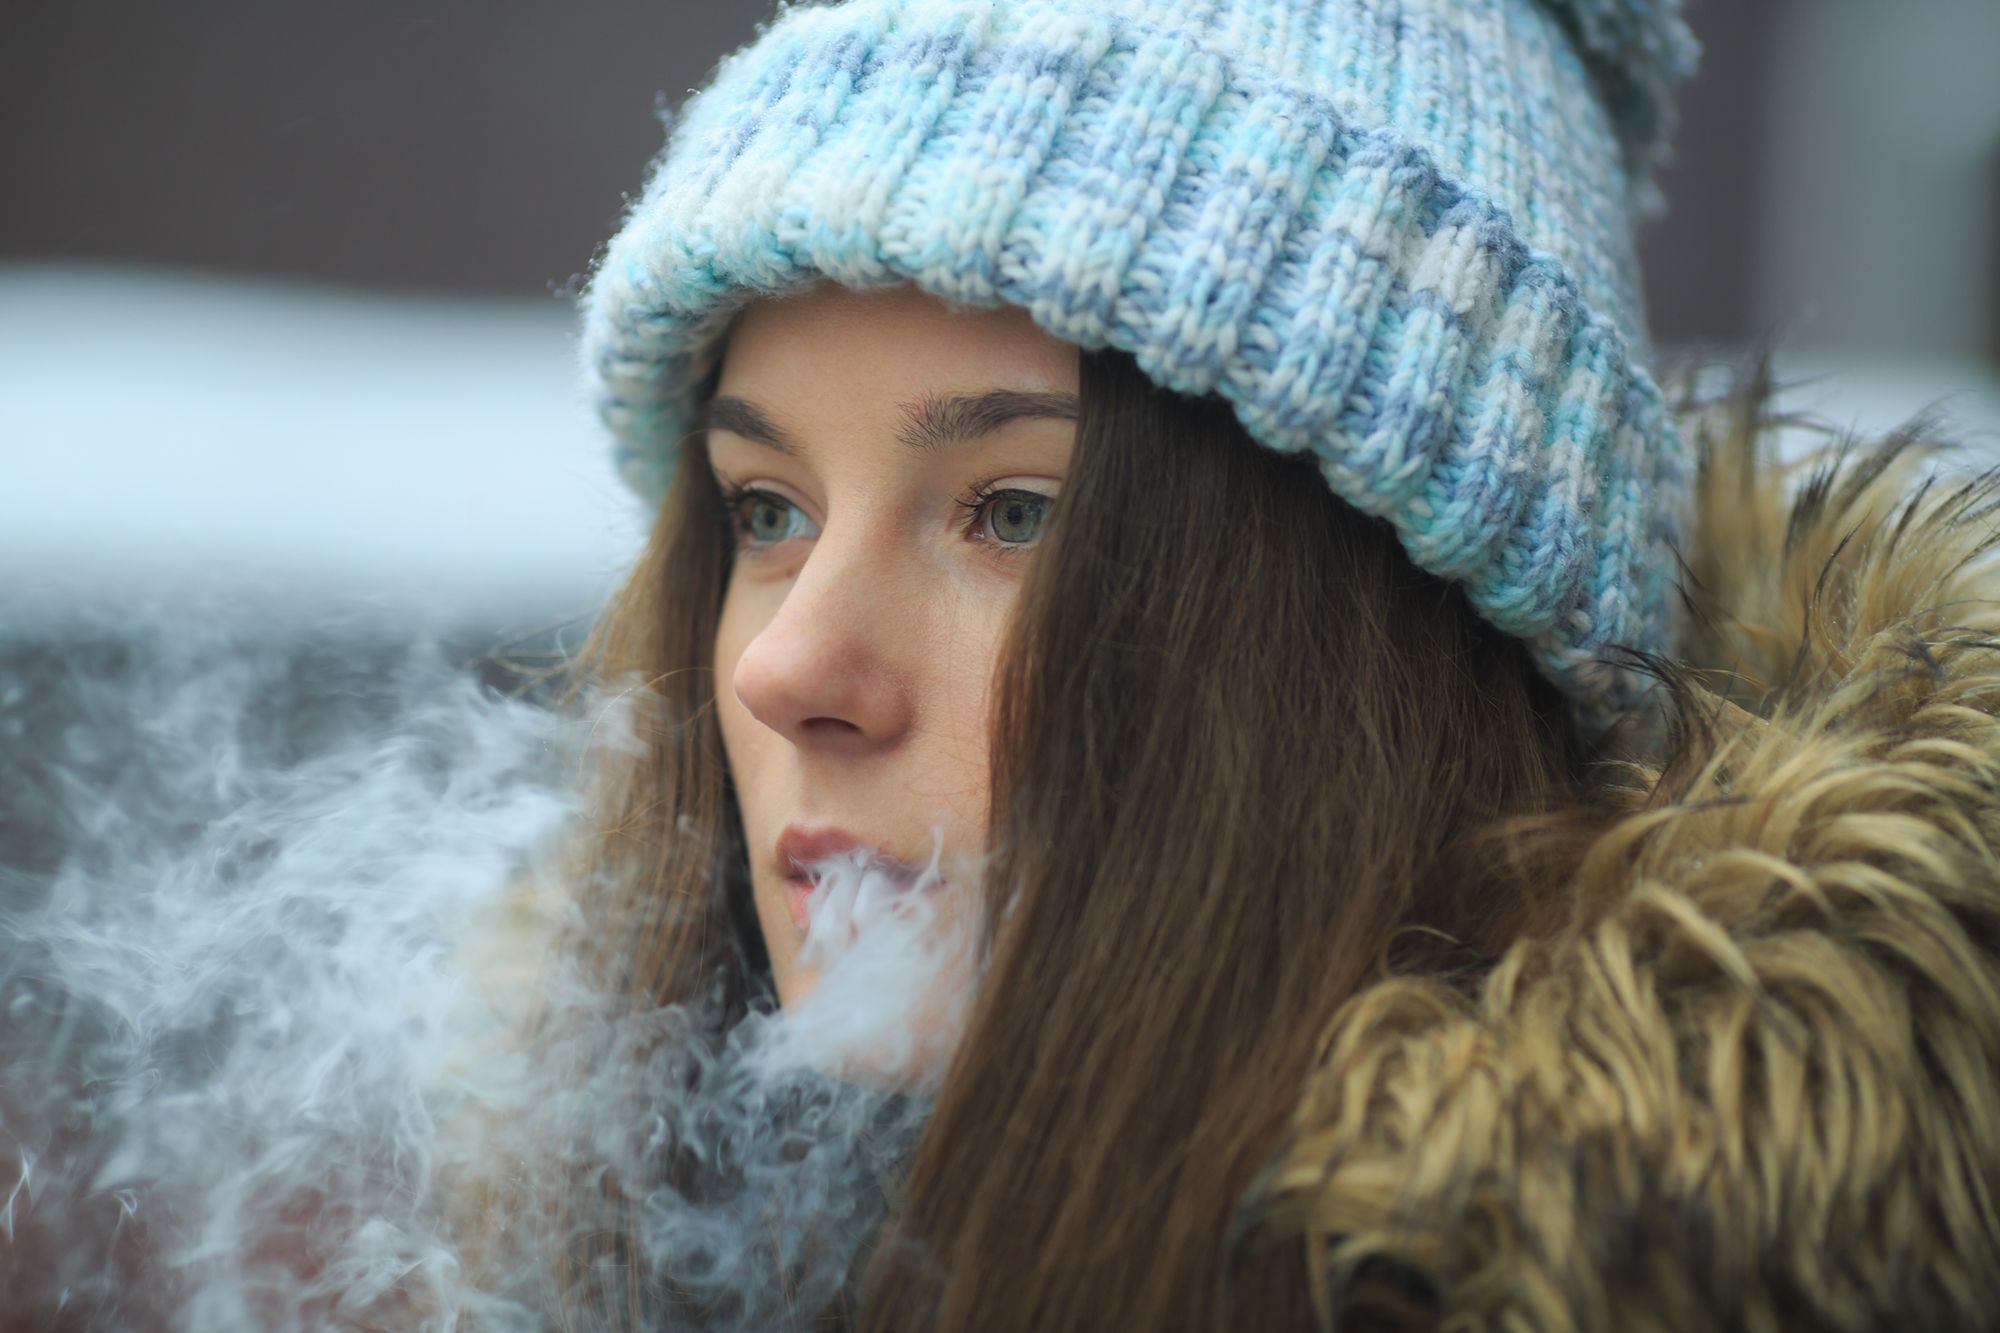 Teens who Vape are at Greater Risk for COVID-19